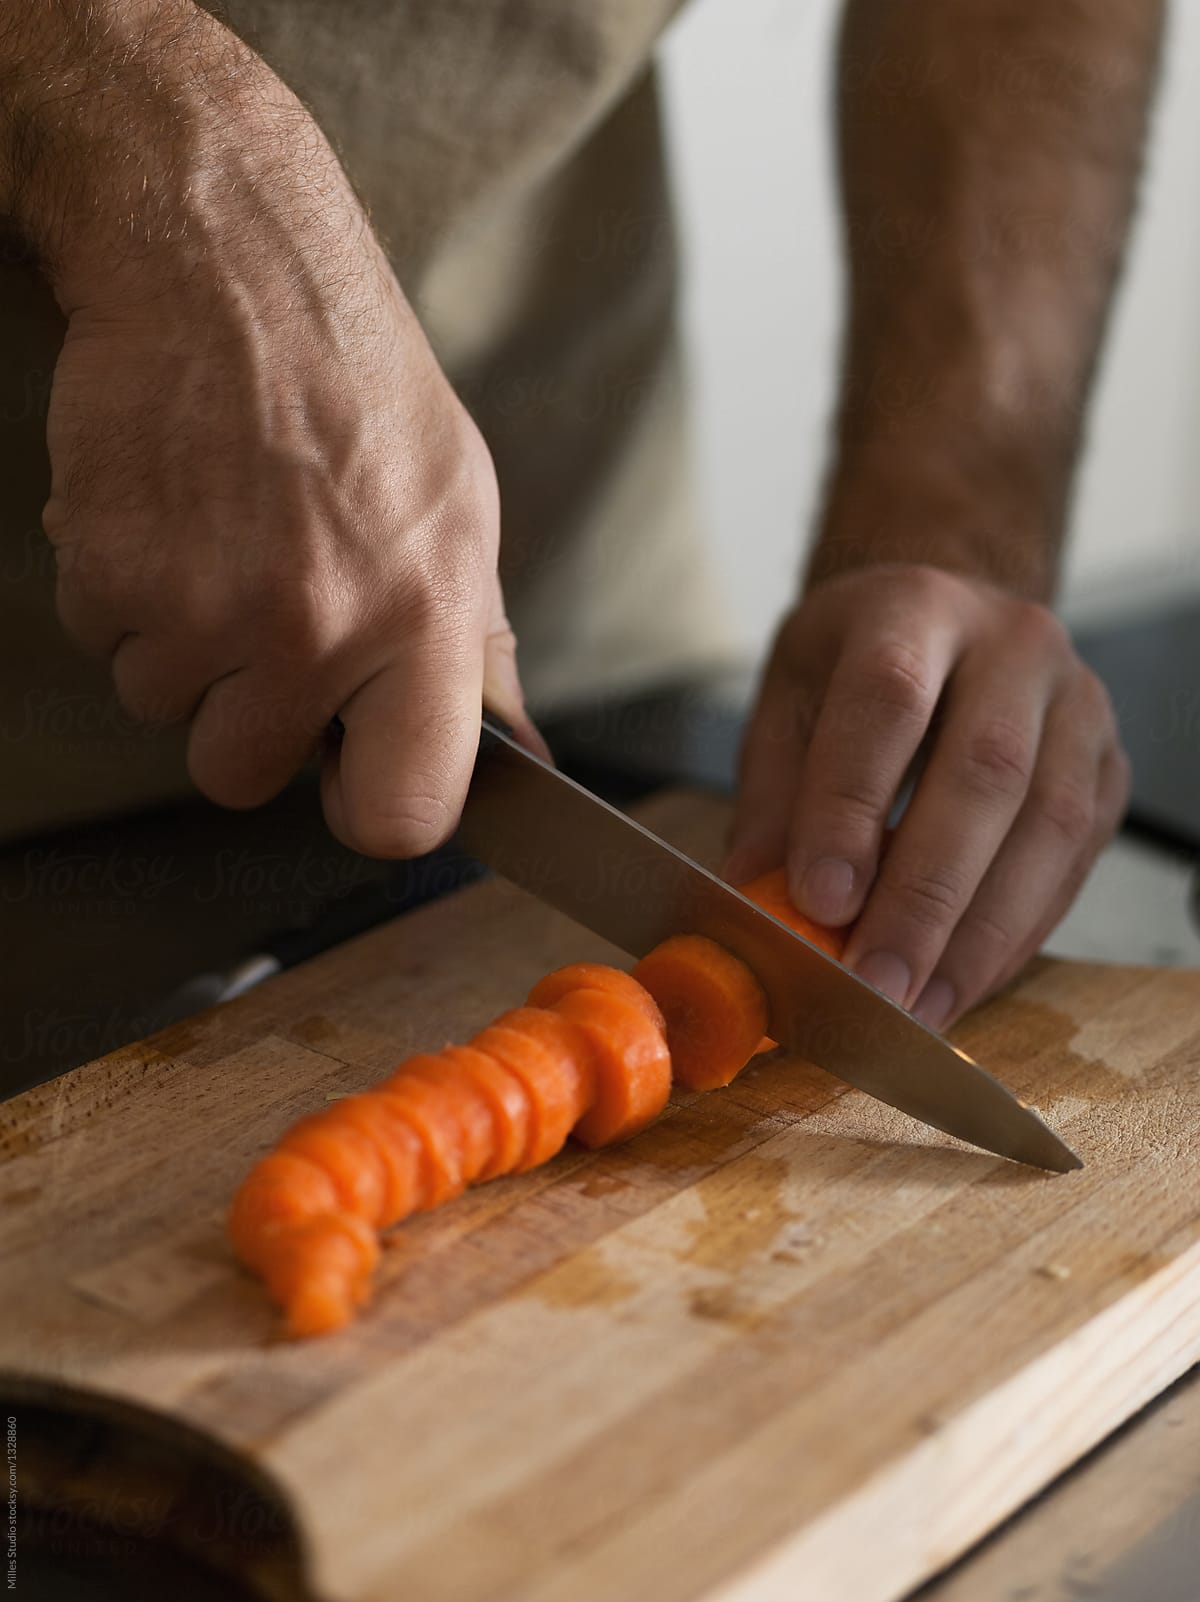 Hands Chopping The Carrot by Stocksy Contributor Milles Studio - Stocksy